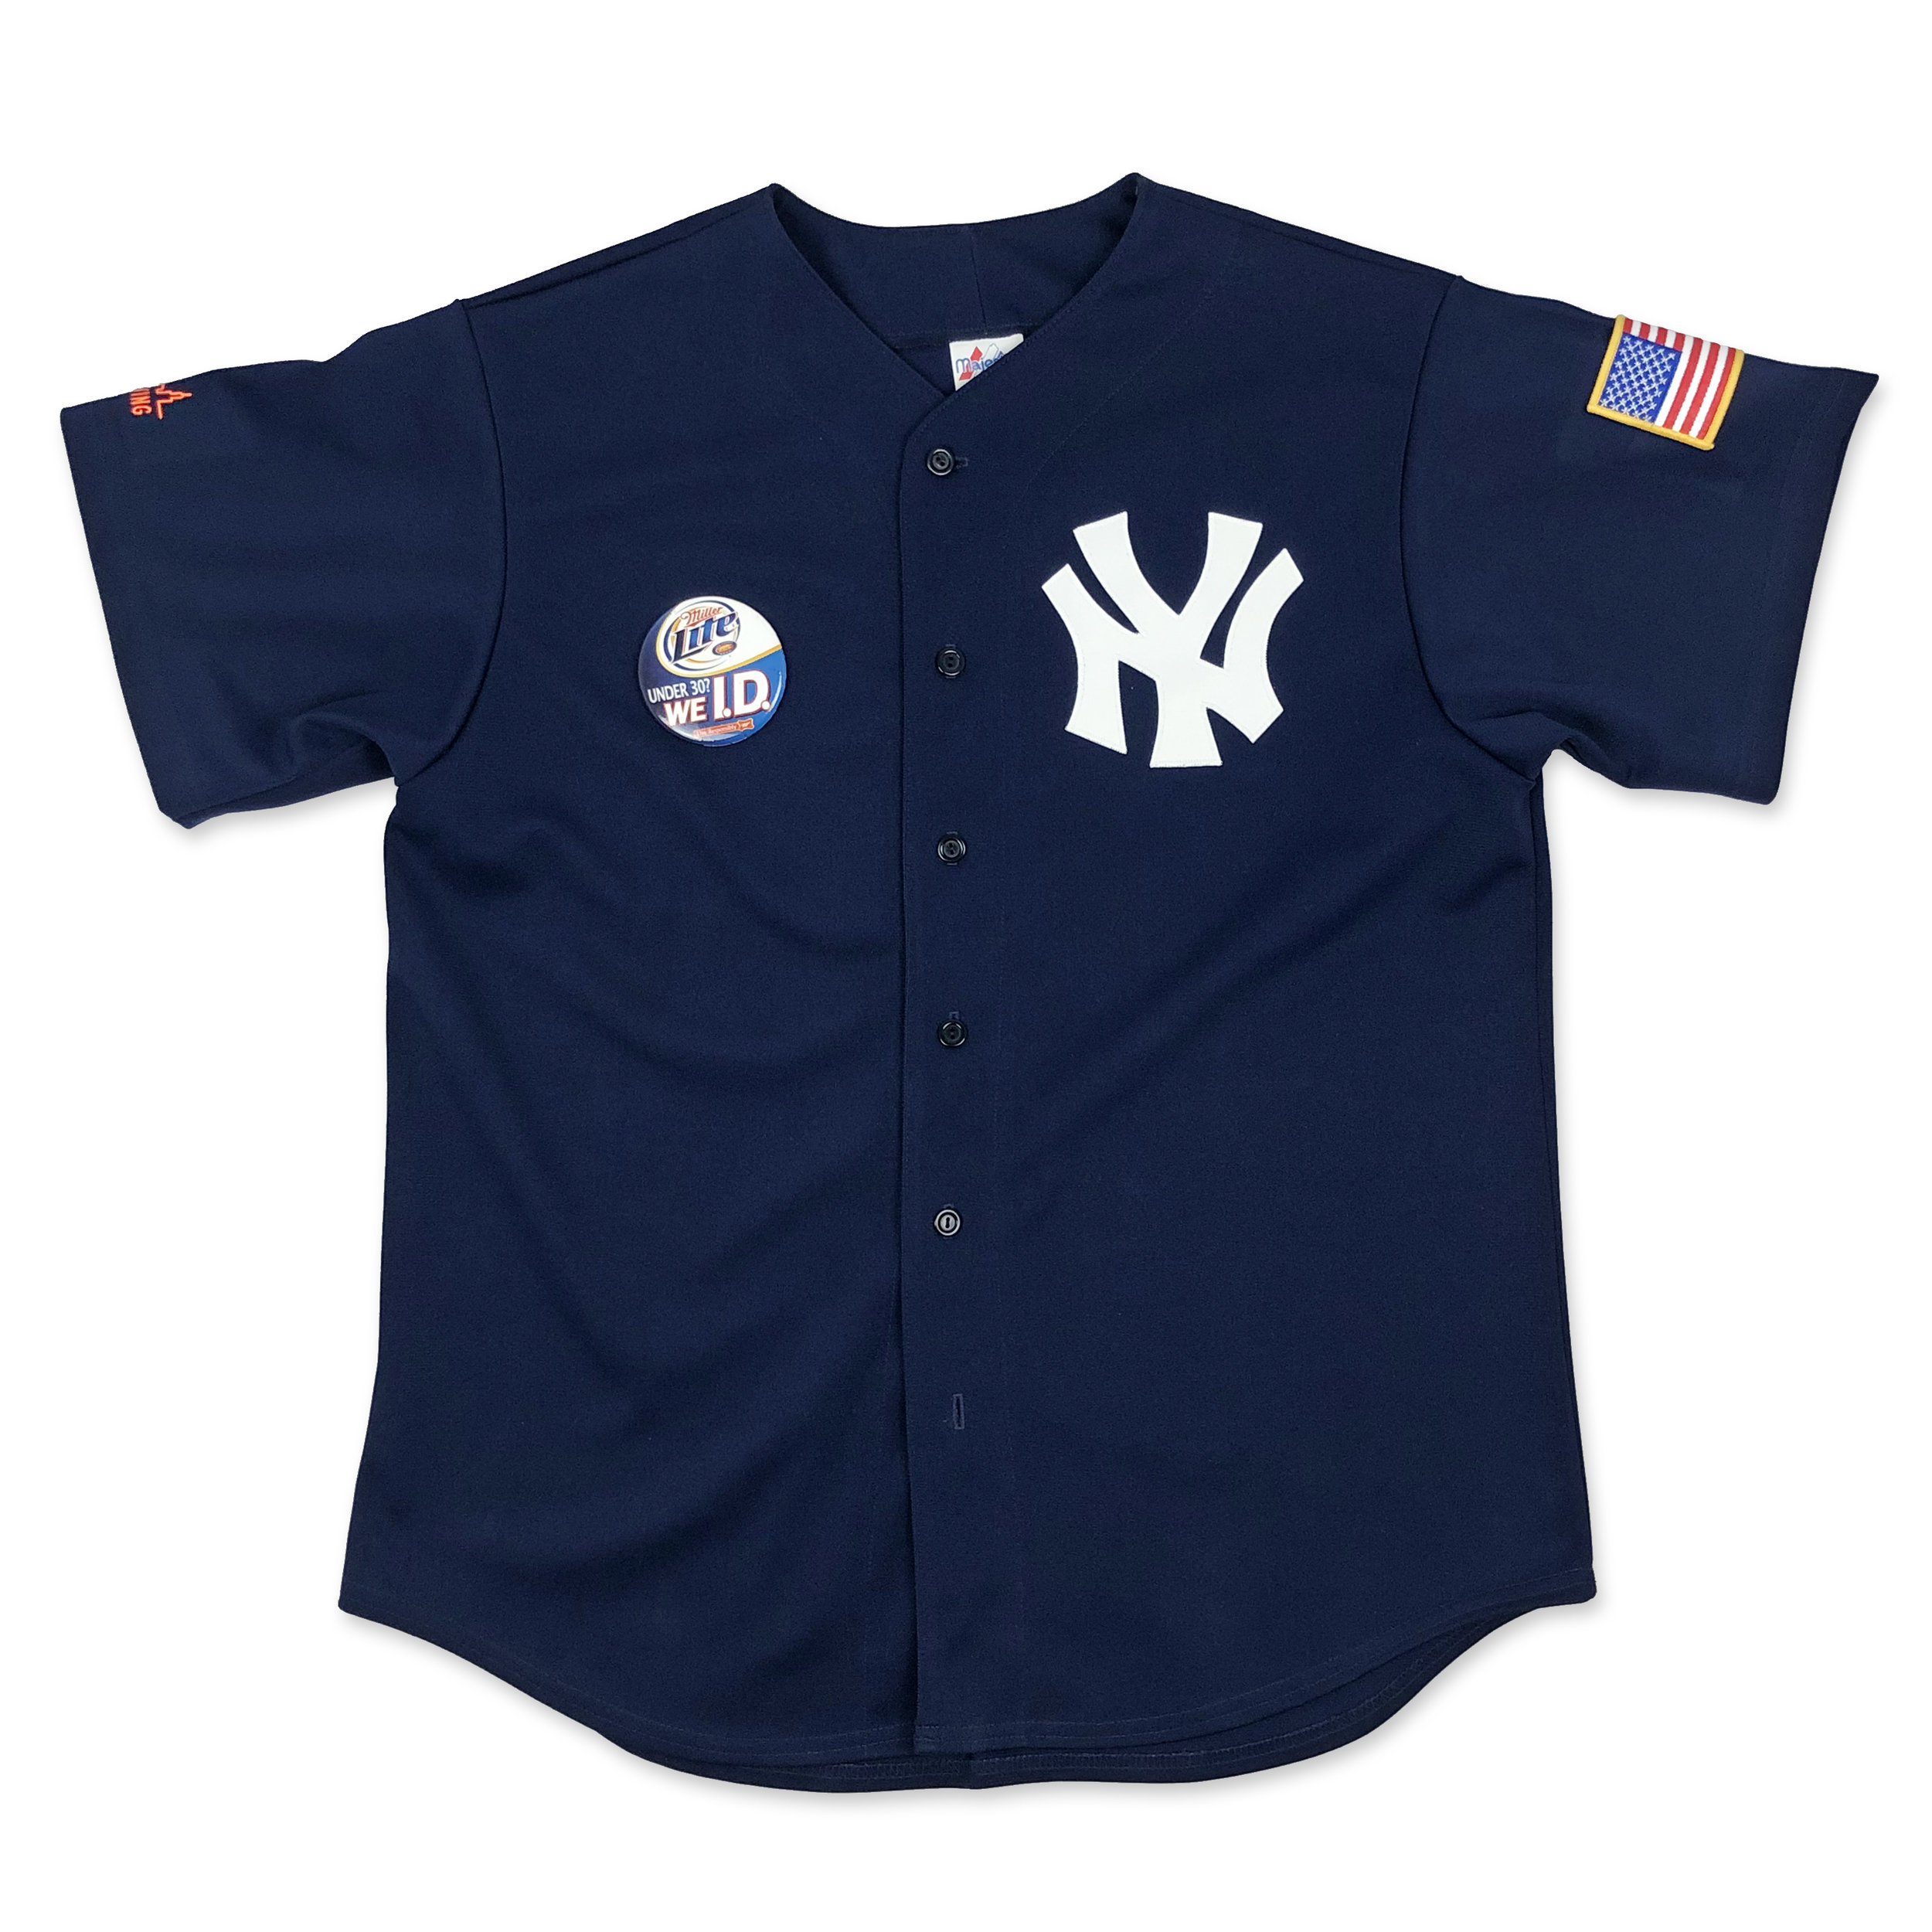 Best Vintage Yankee Jersey for sale in Simi Valley, California for 2023